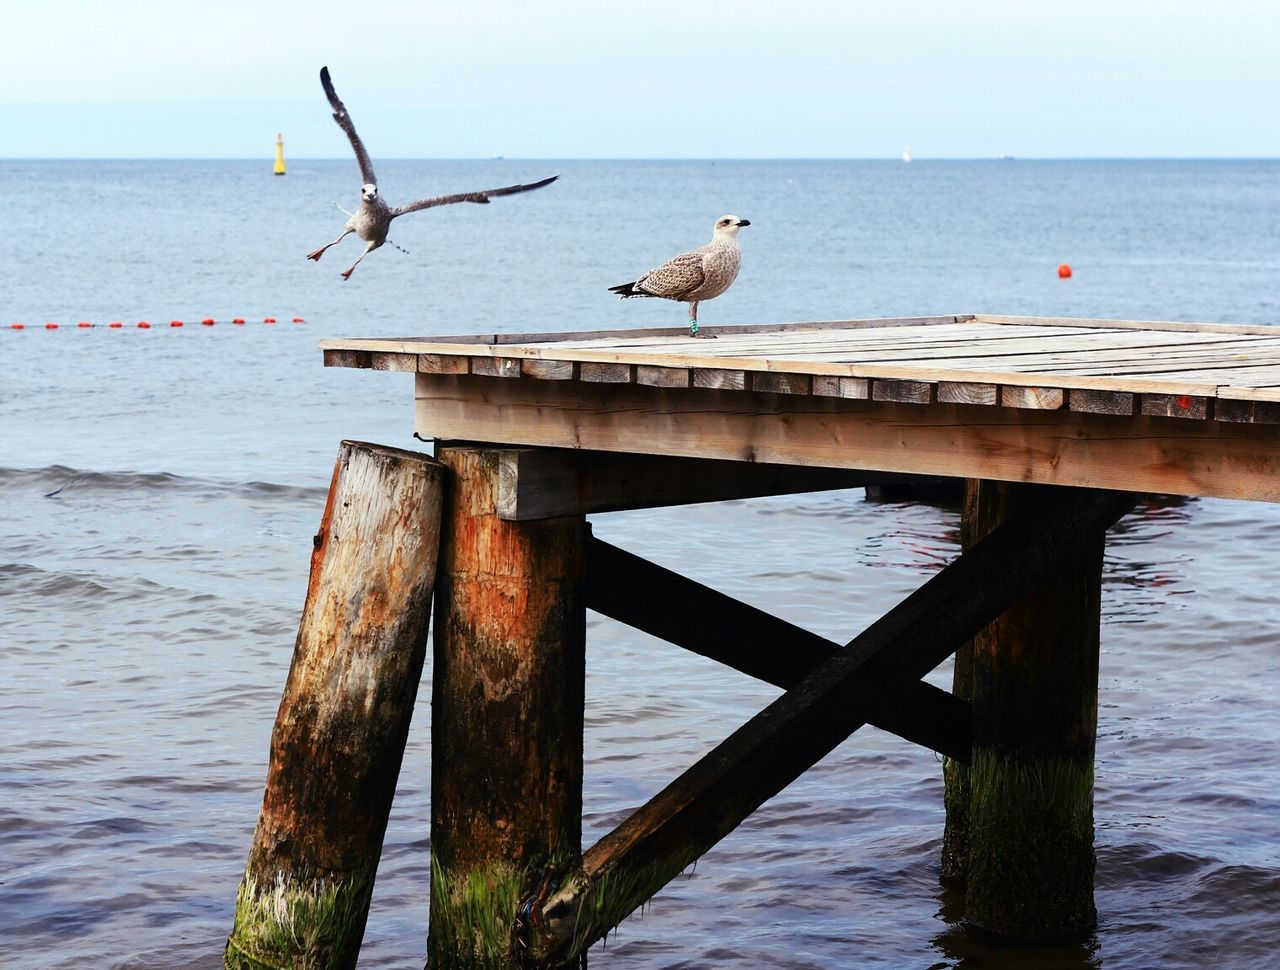 SEAGULLS PERCHING ON WOODEN PIER OVER SEA